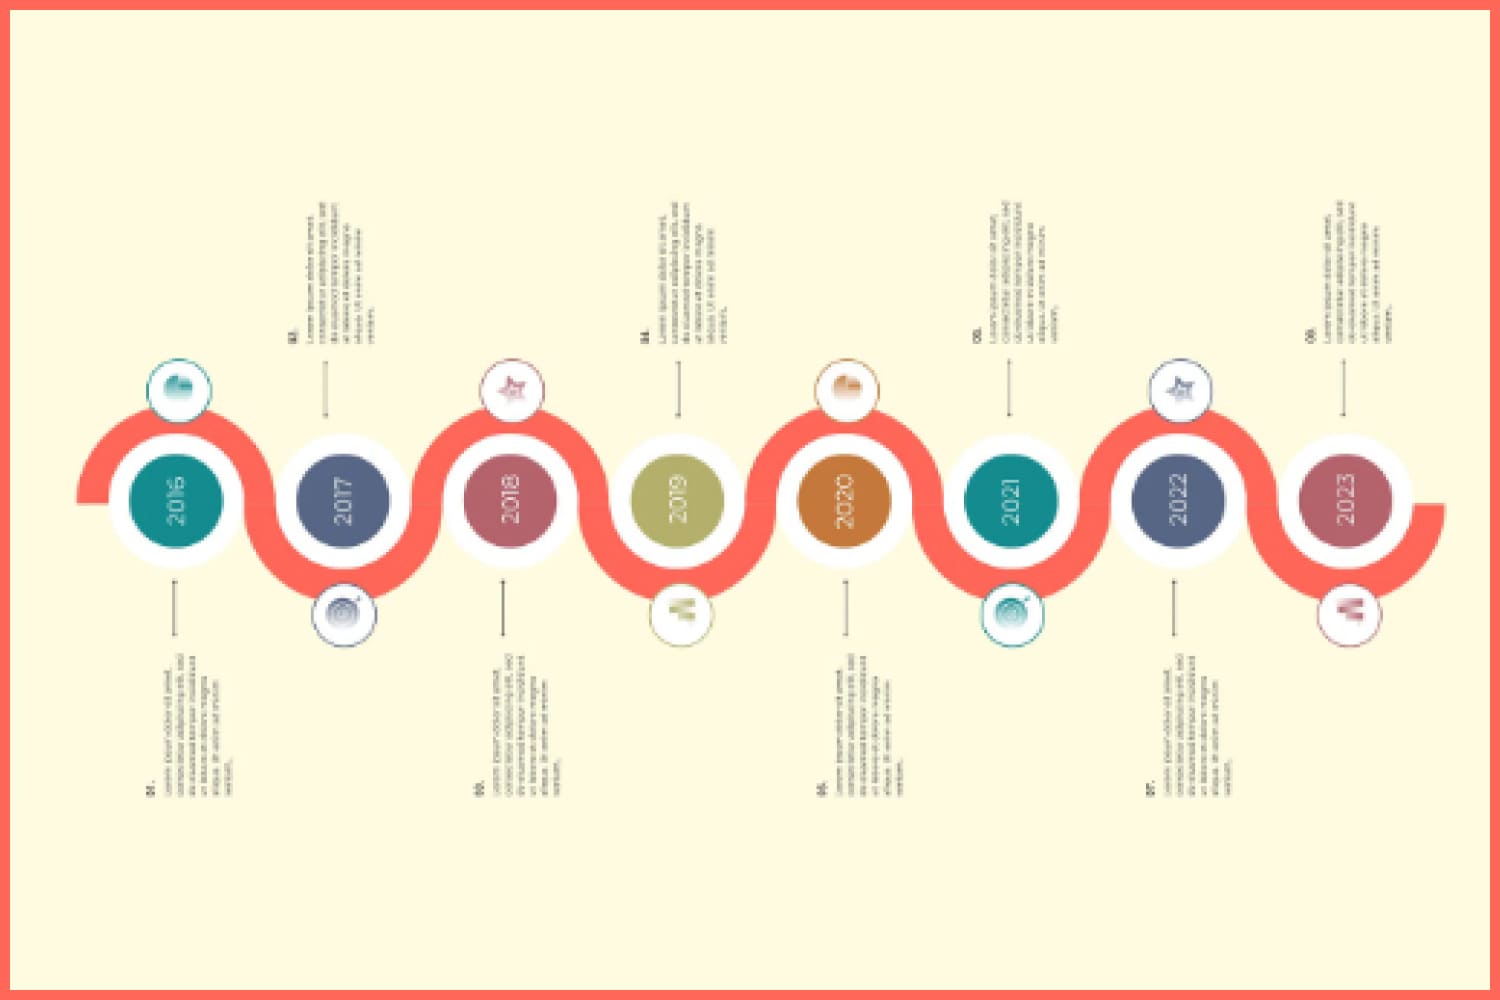 Timeline in the form of circles and a red line.